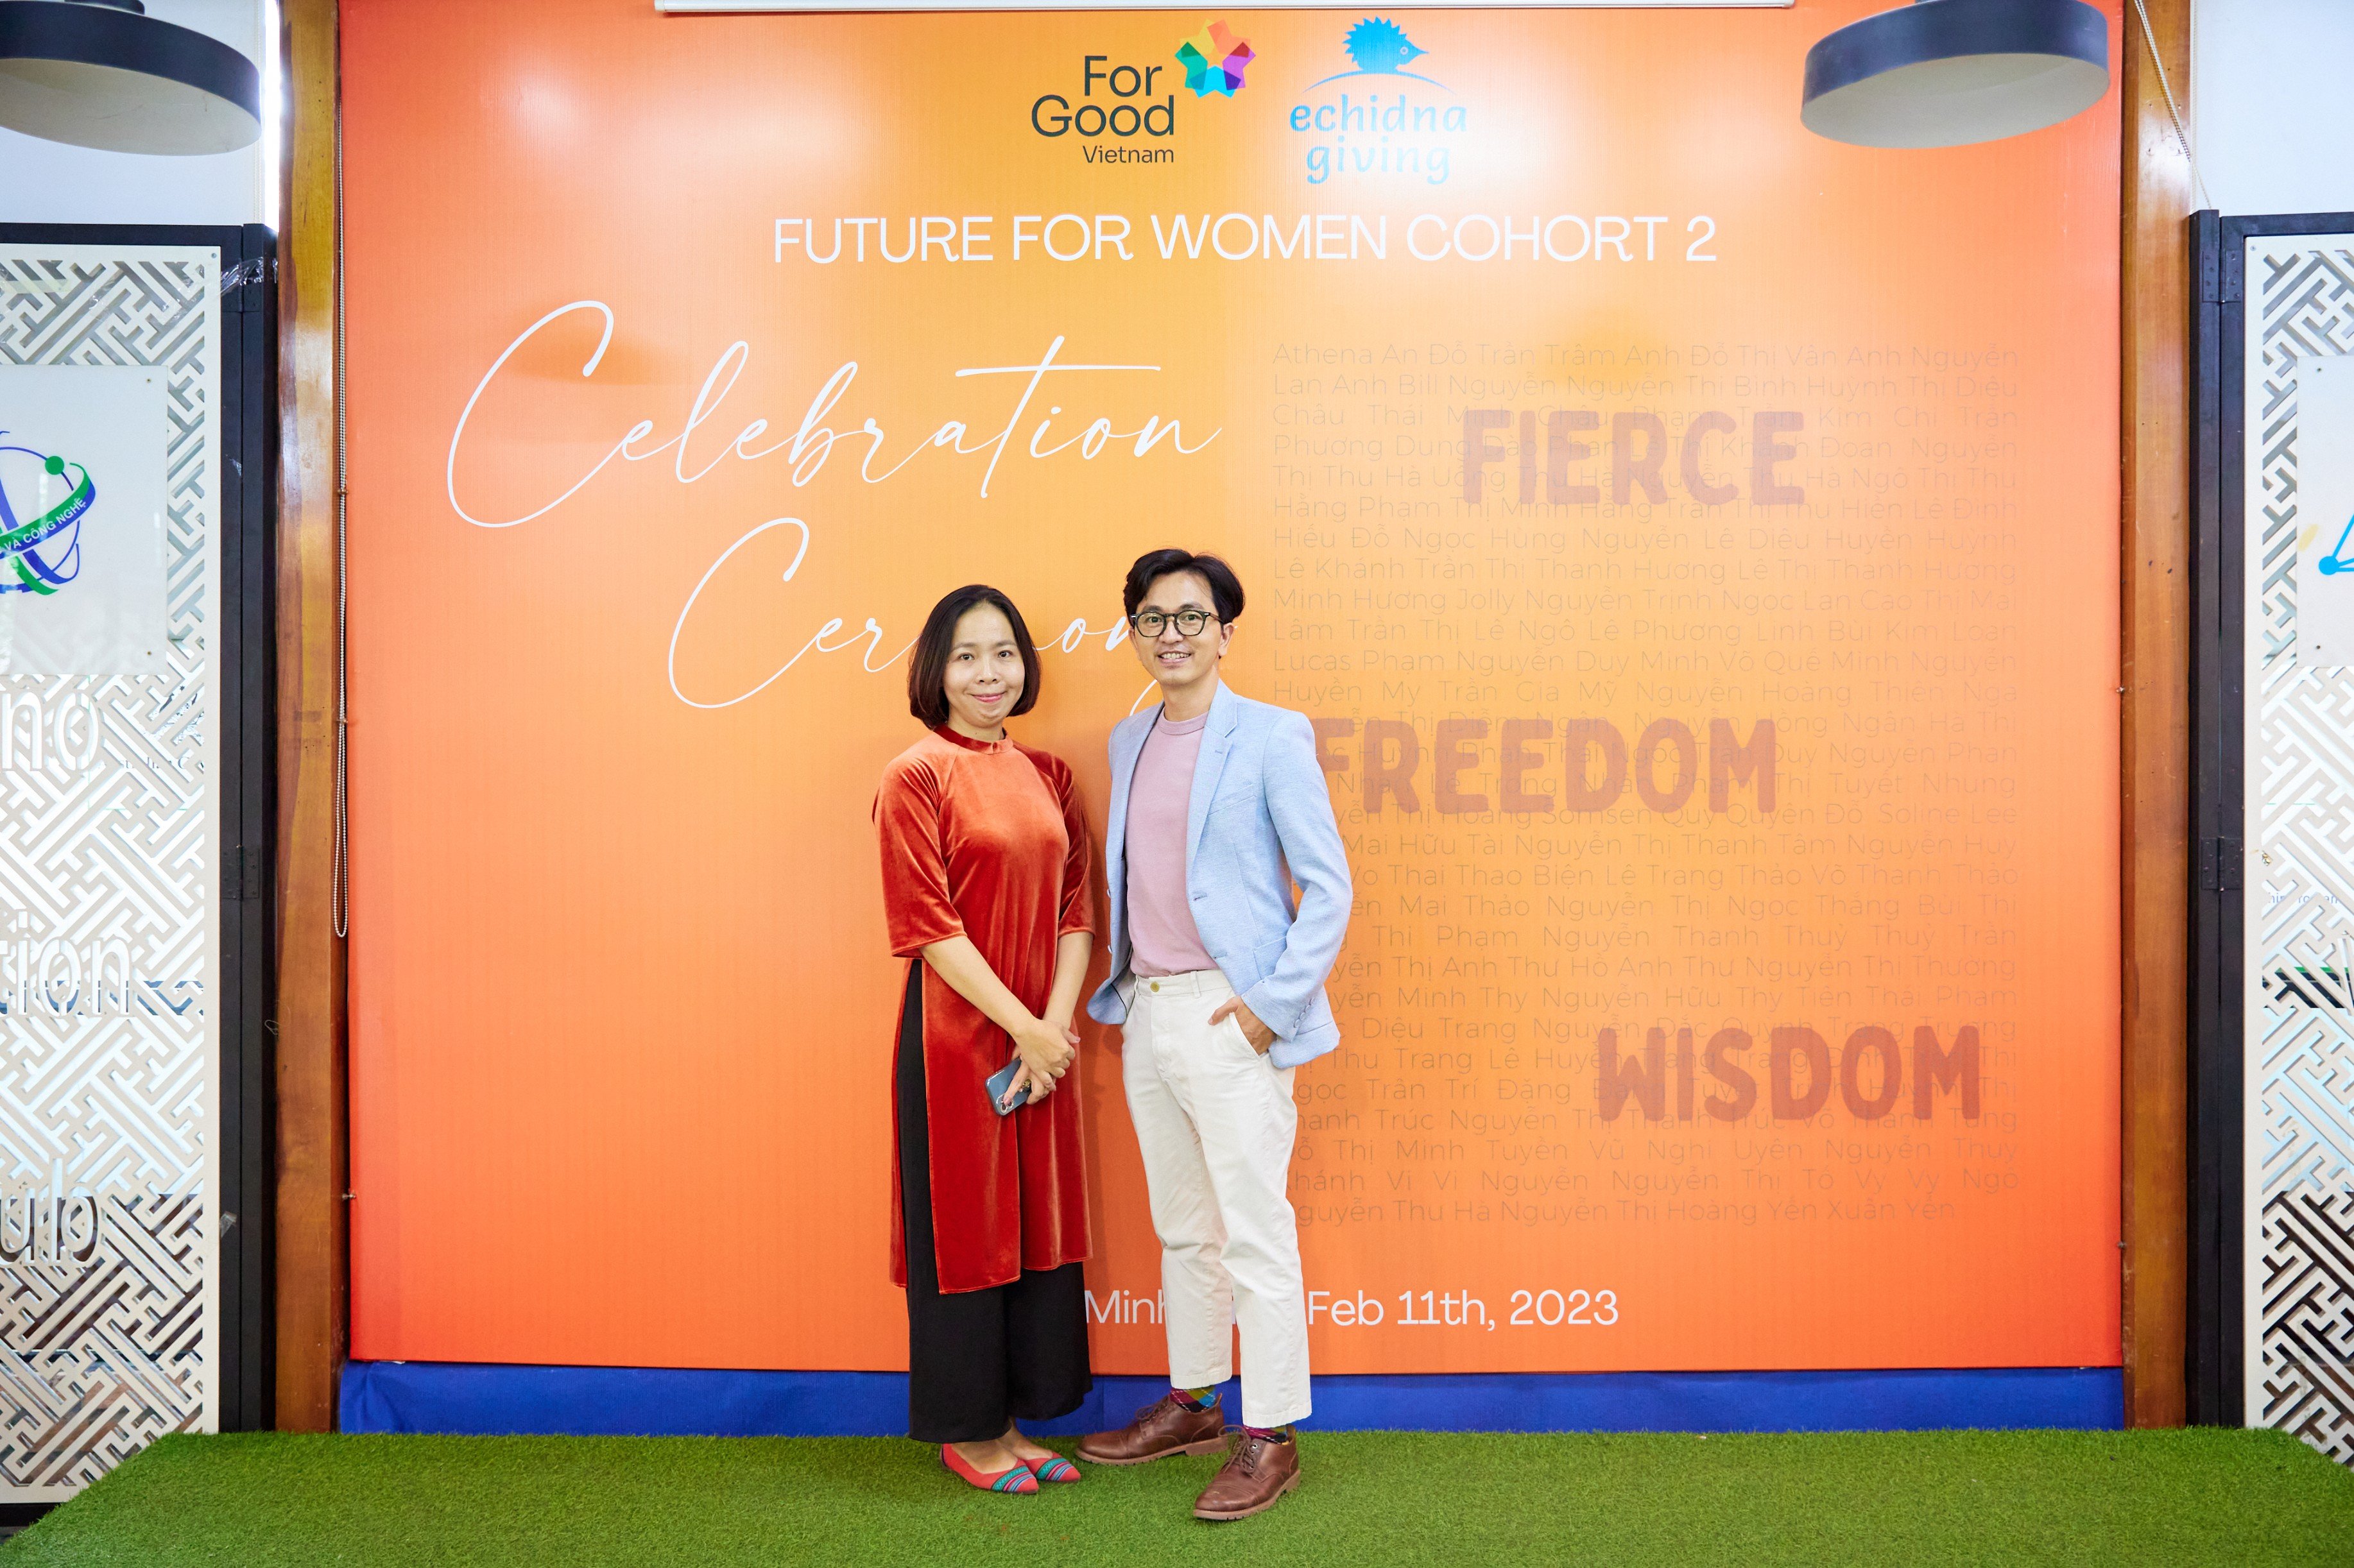 Huynh Le Khanh (R) and Tran Thi Ngoc Tran, co-founders of ForGood Vietnam, pose for photos at a ceremony to award achievement certificates to the participants of the six-month Future For Women program on February 11, 2023. Photo: ForGood Vietnam